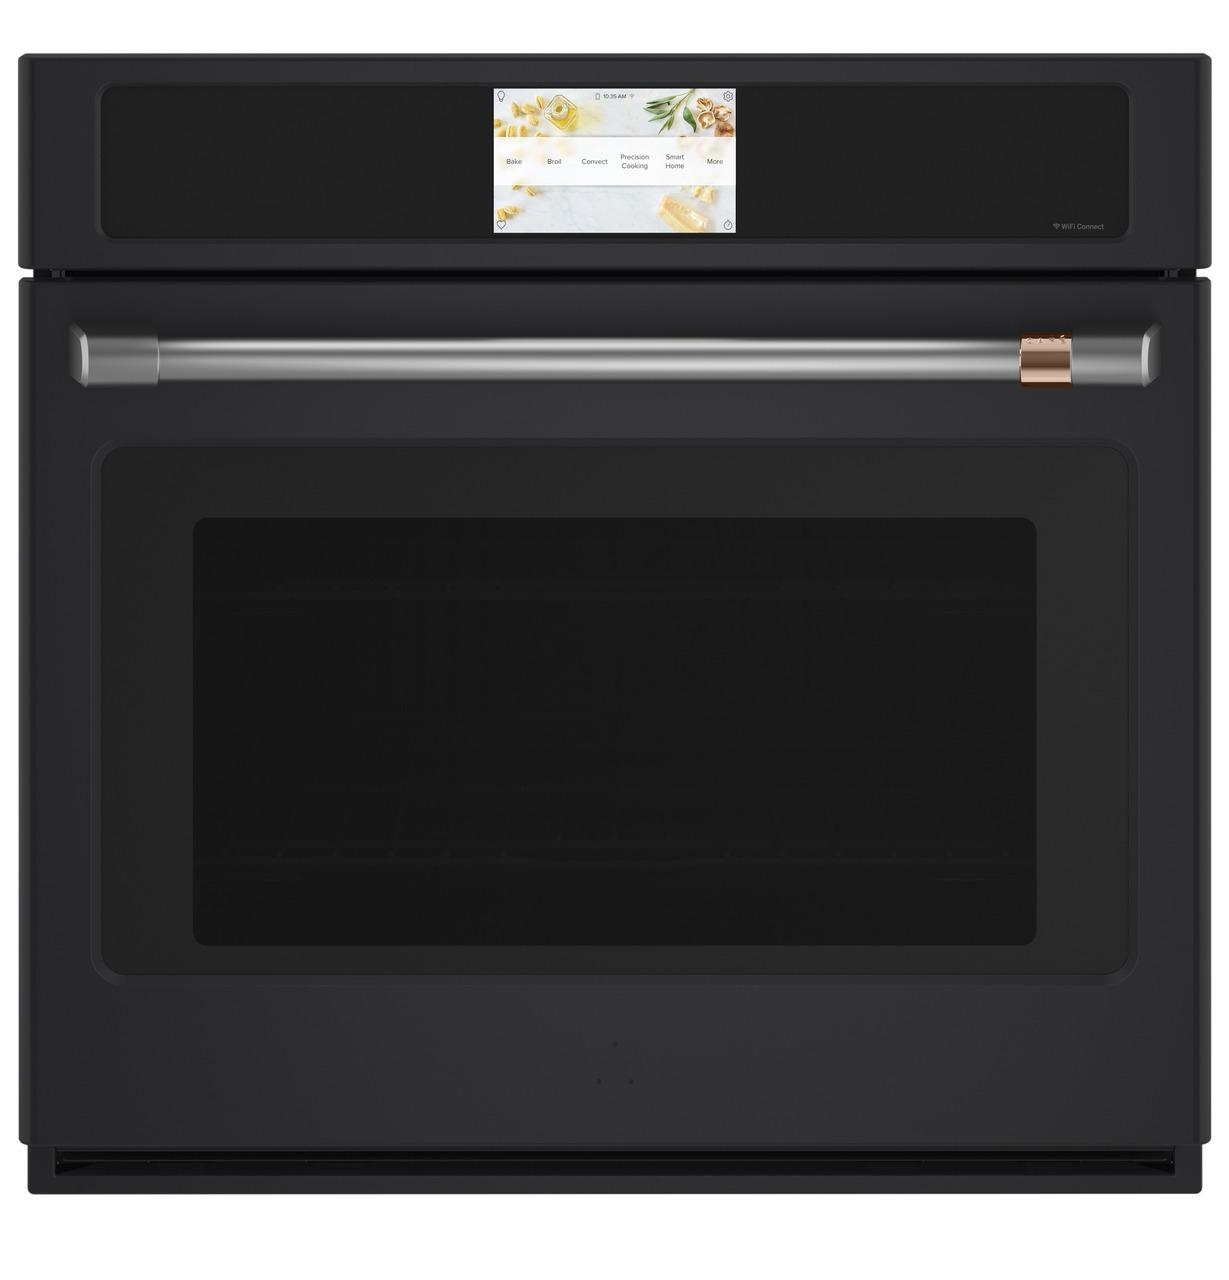 Cafe Caf(eback)™ Professional Series 30" Smart Built-In Convection Single Wall Oven